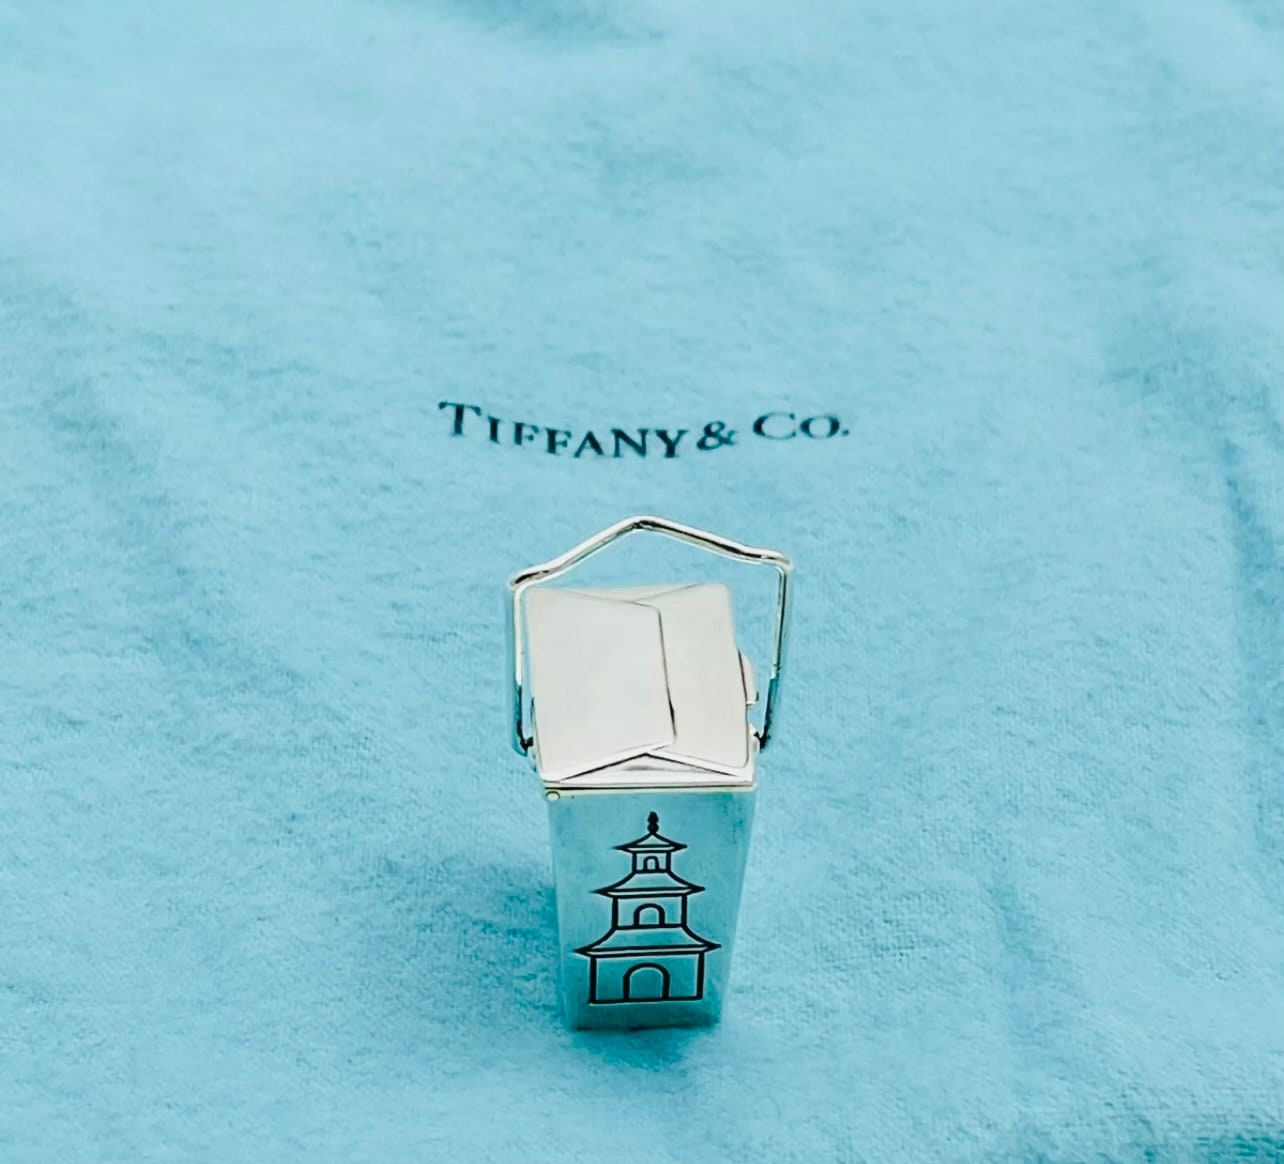 Tiffany and Co Chinese Take Out Pill Box Case Container Rare 